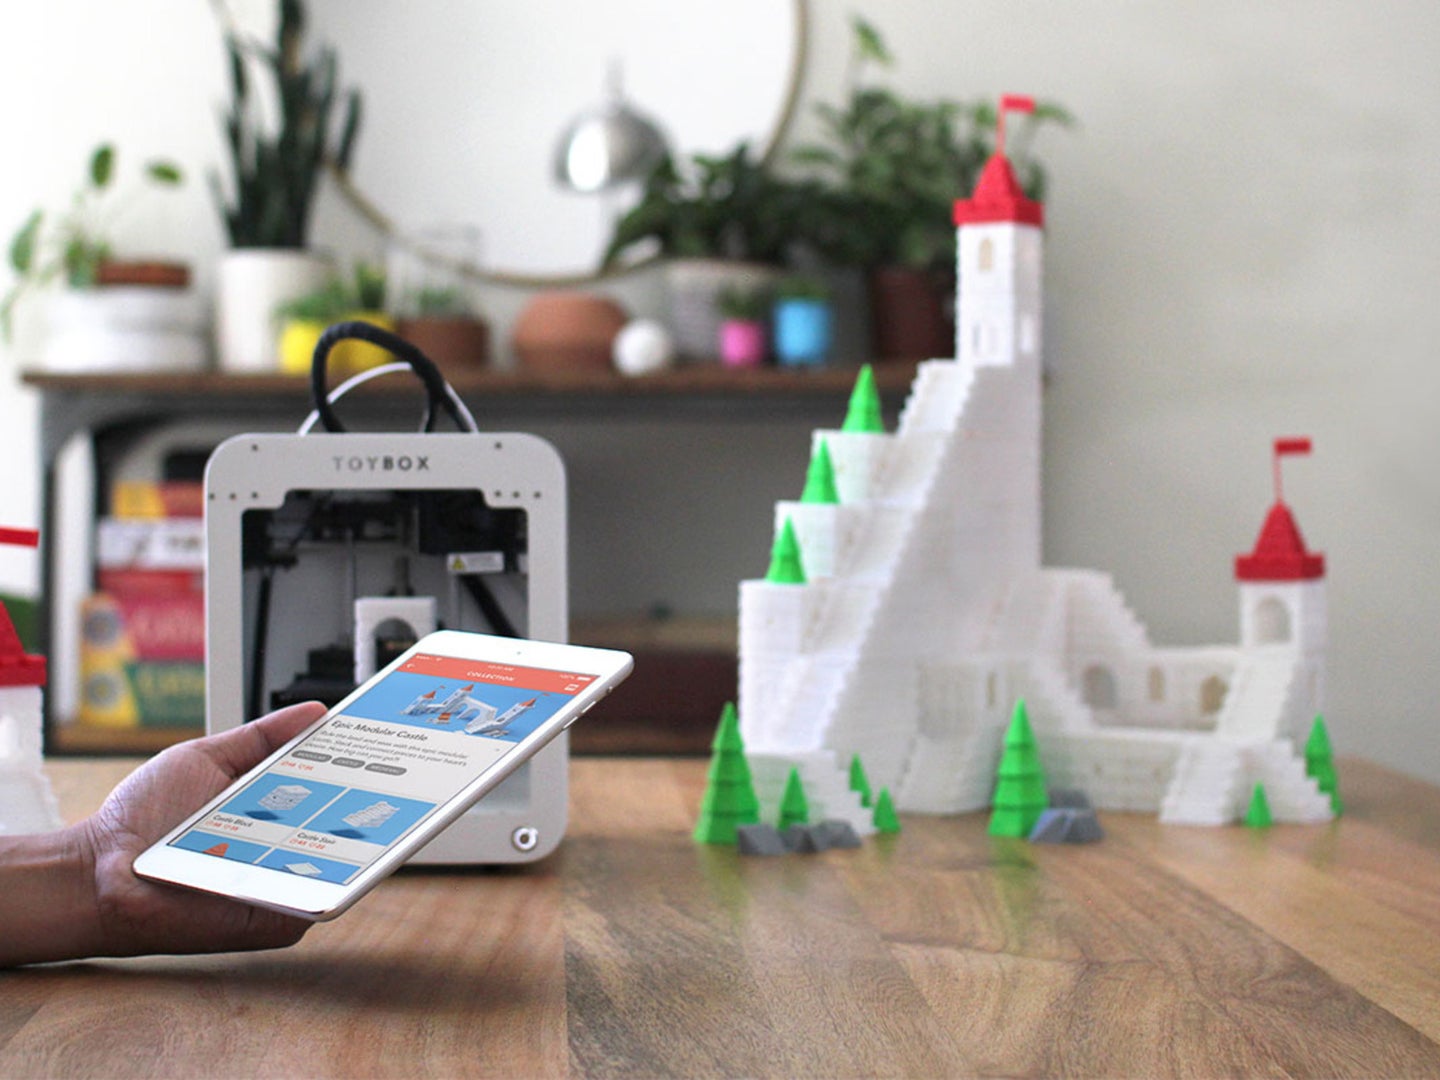 A person uses their smartphone to control their 3D printer